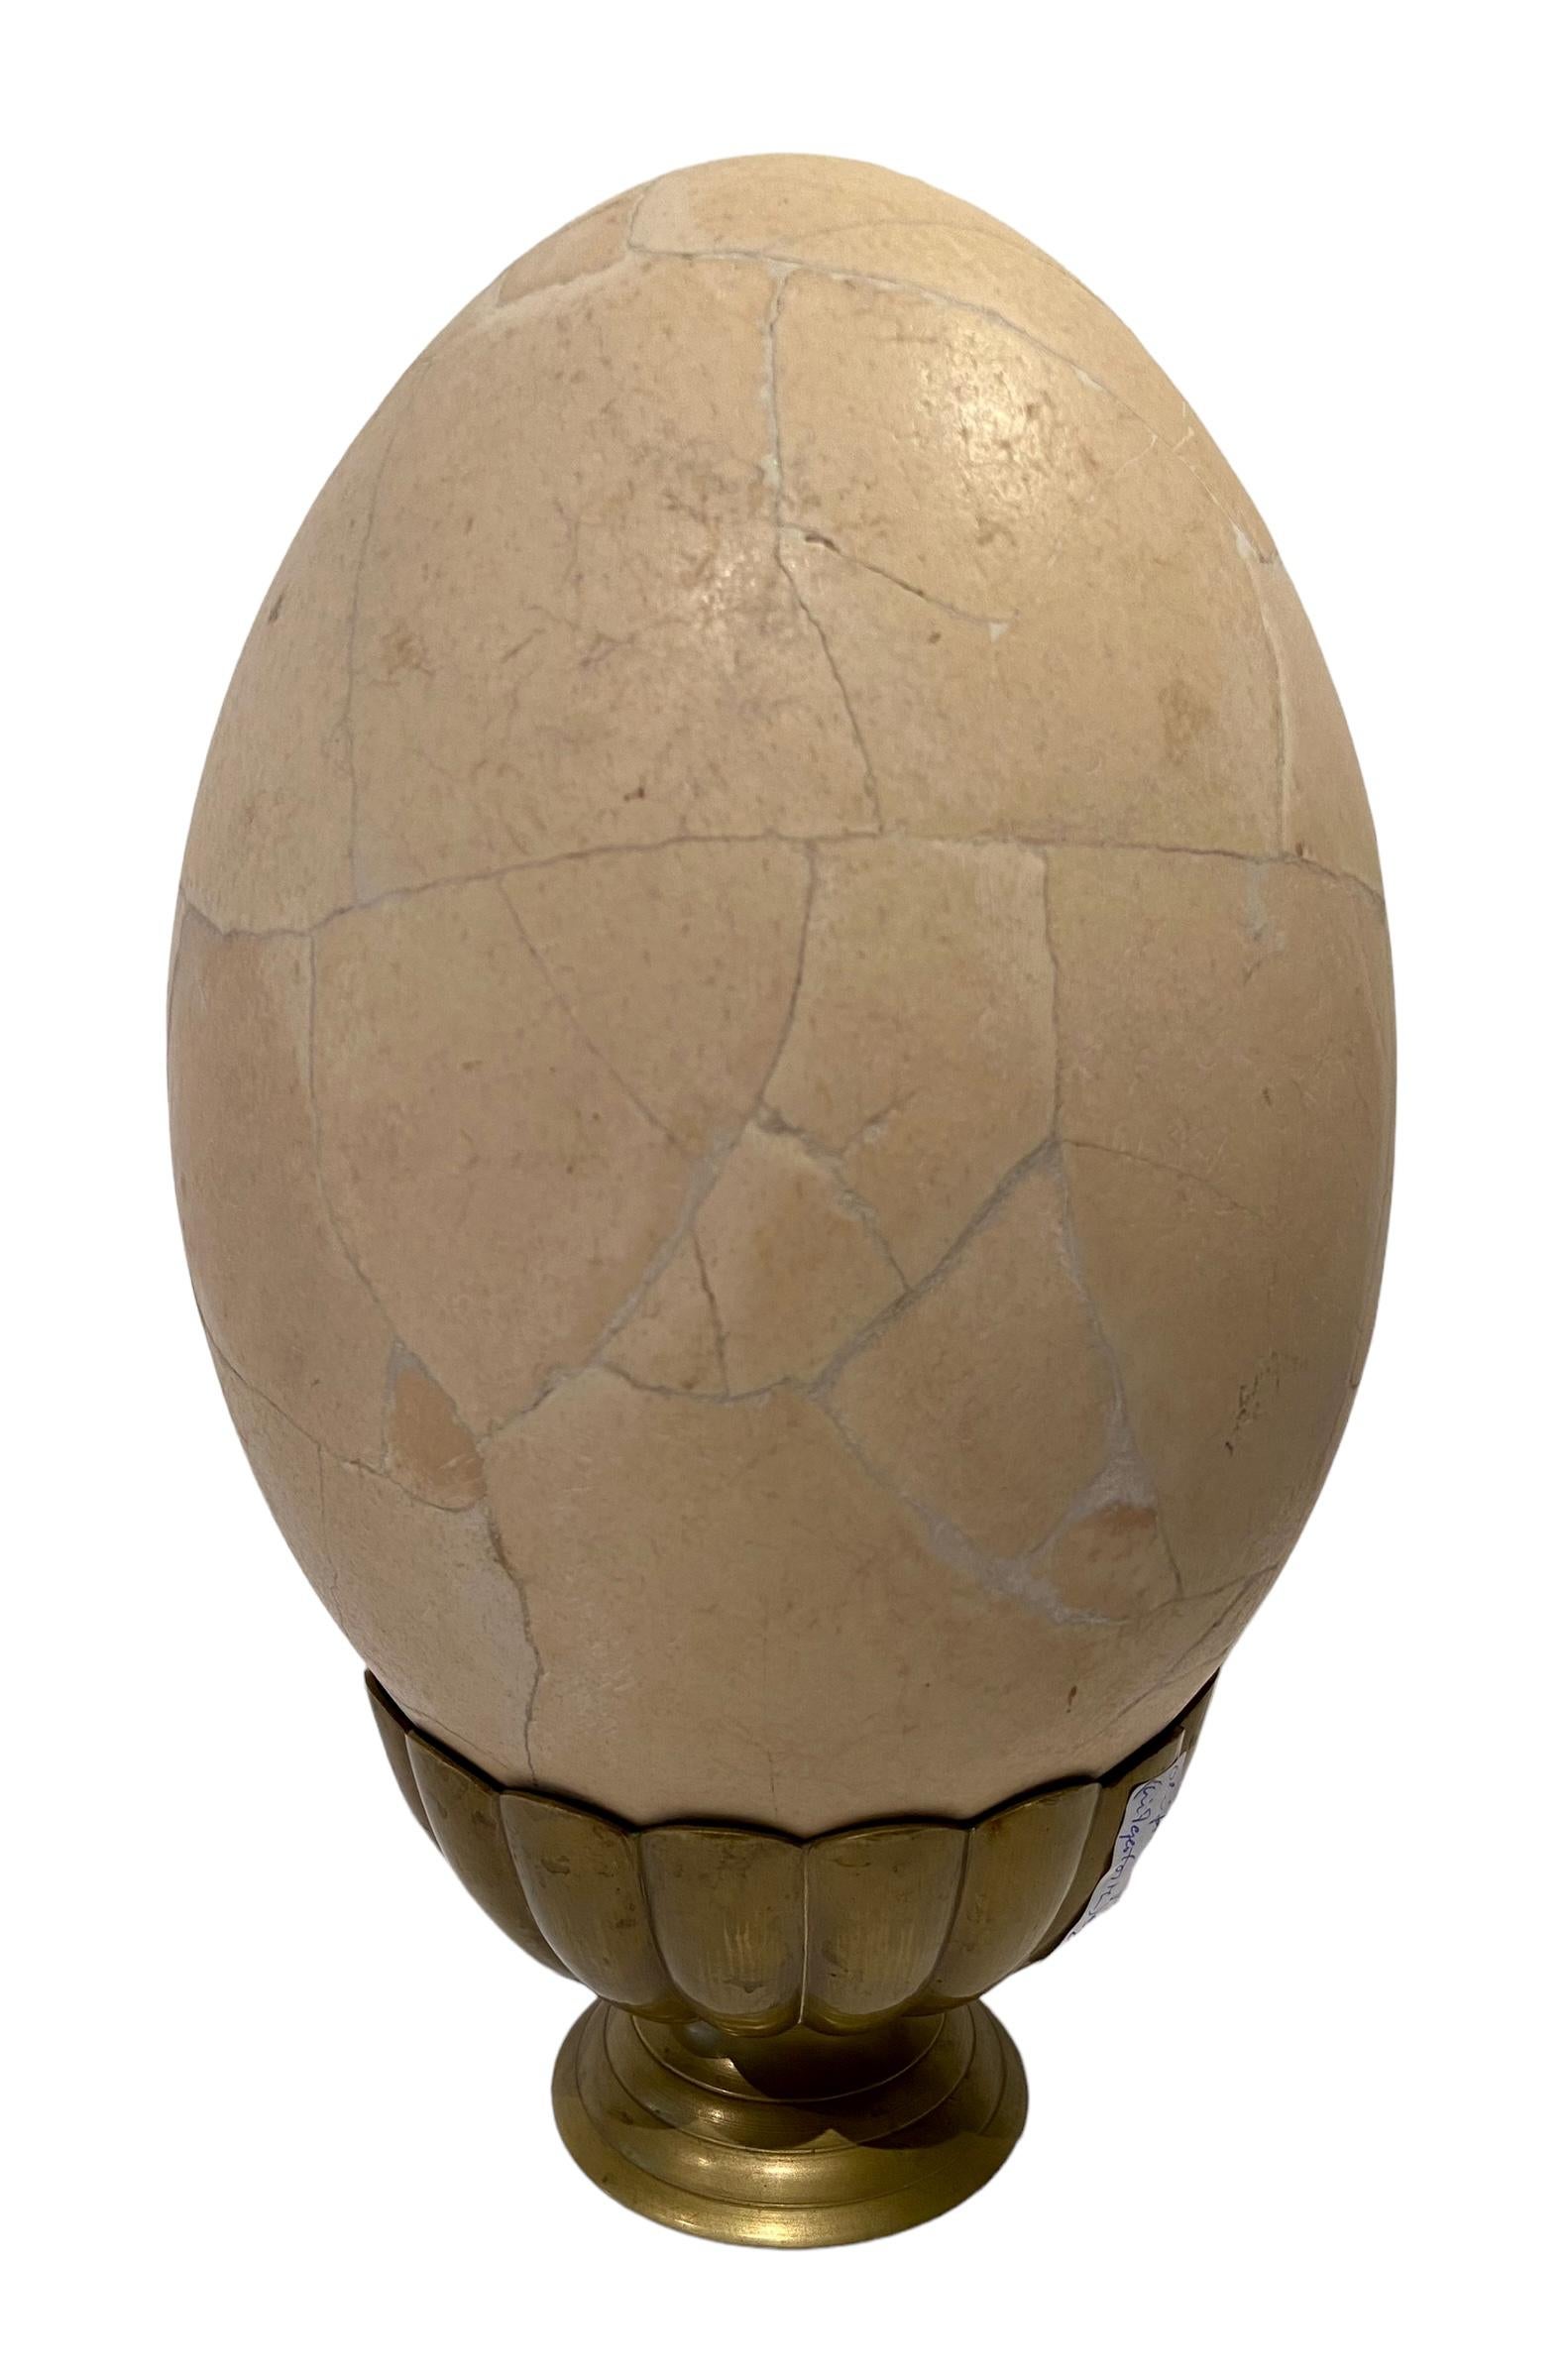 Elephant bird egg from Madagascar.
The largest egg ever from a living creature; it is from the extinct elephant bird. Assembled from the shards of several eggs. 
Age: 1,000 to 1,500 years old. Length: 31 cm. Diameter: 22 cm.
Presented on a brass